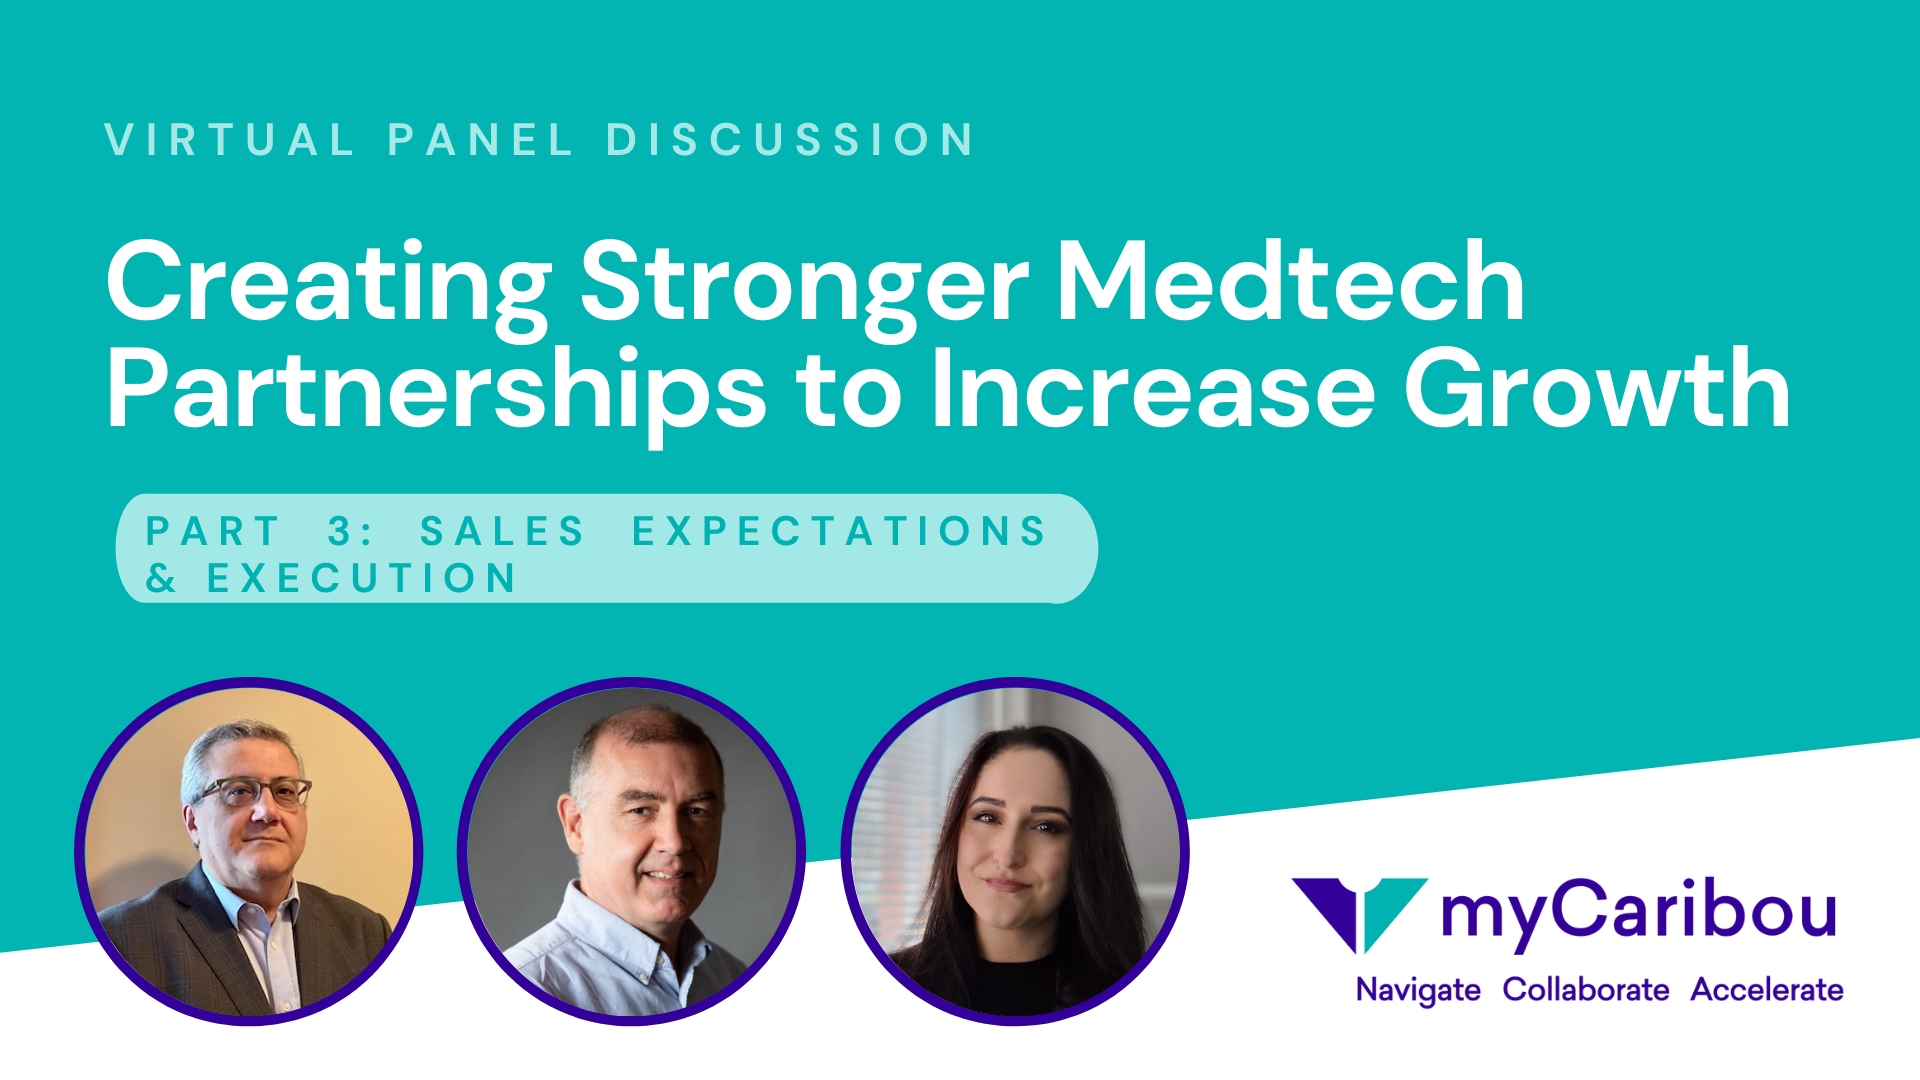 Creating Stronger Medtech Partnerships to Increase Growth Part 3 - Sales Expectations & Execution